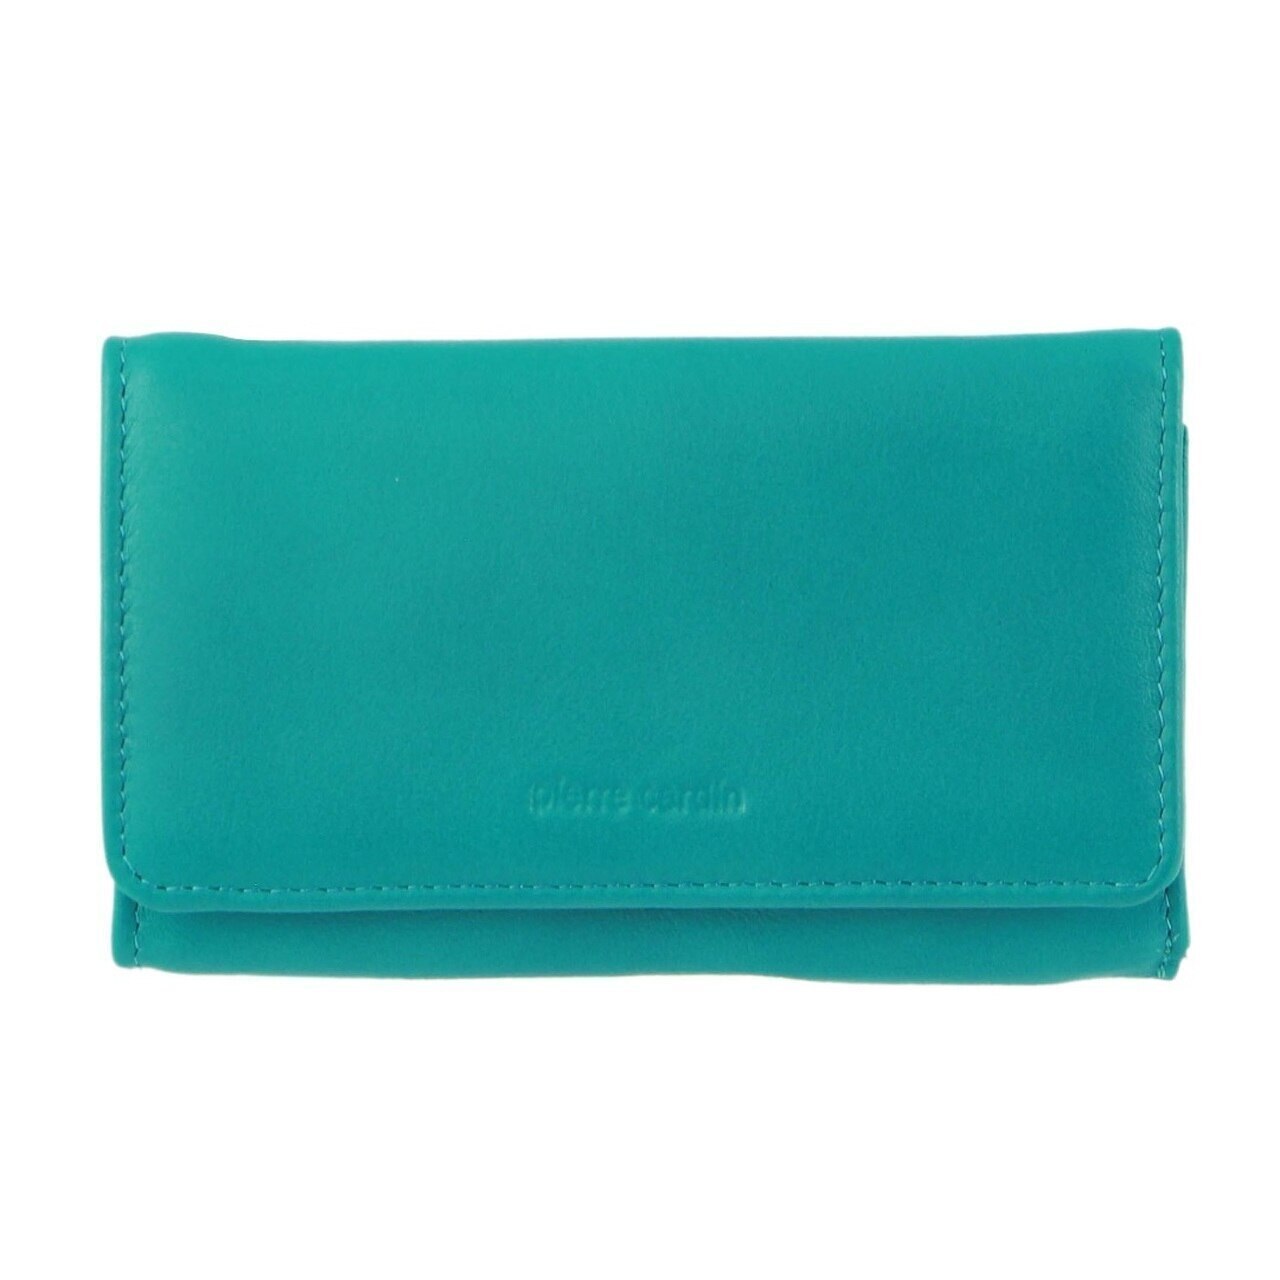 Womens Soft Italian Leather RFID Purse Wallet Rustic - Turquoise